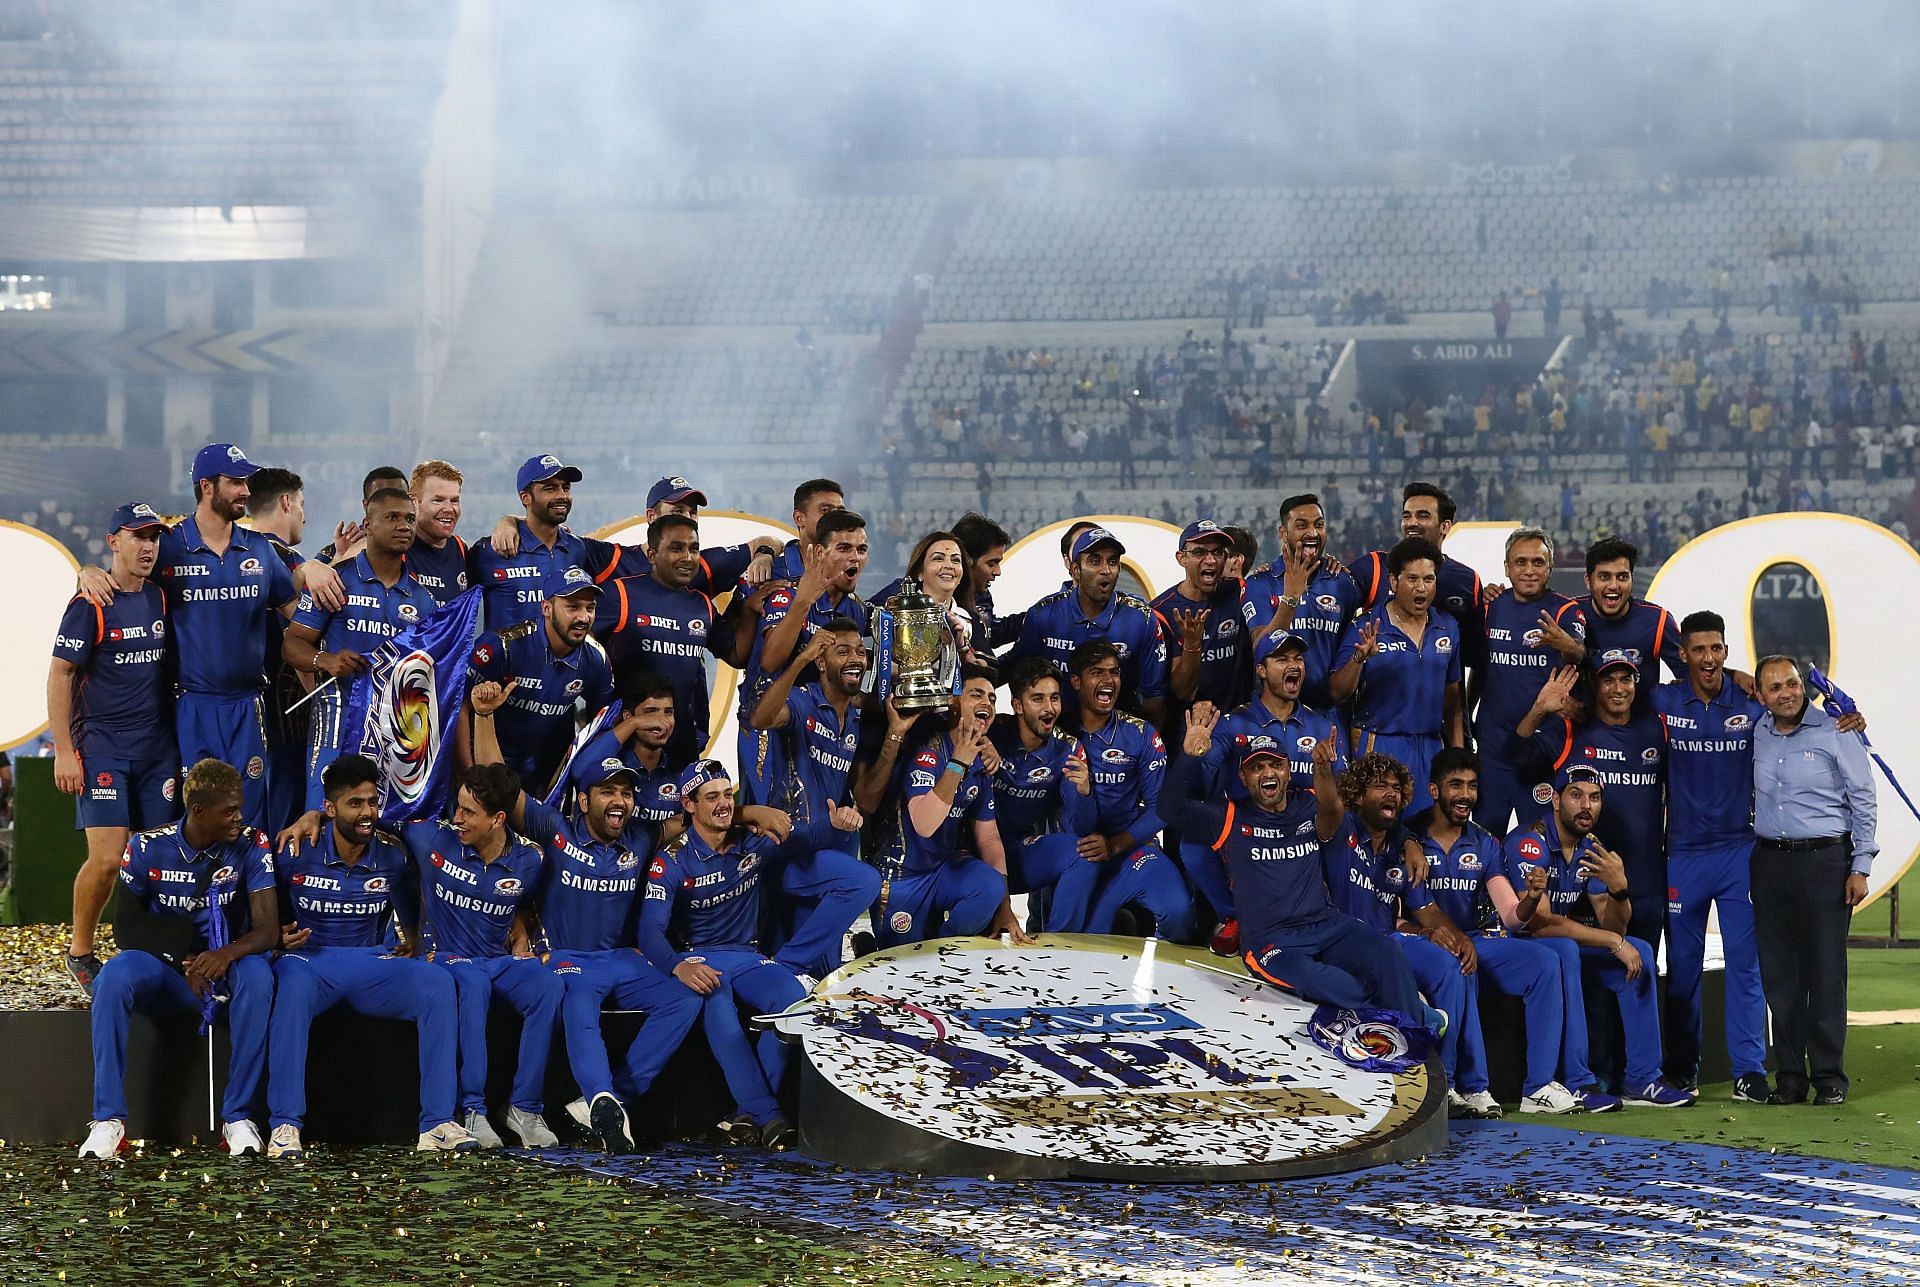 Mumbai Indians are the most successful side in the IPL, having won the league a record five times.